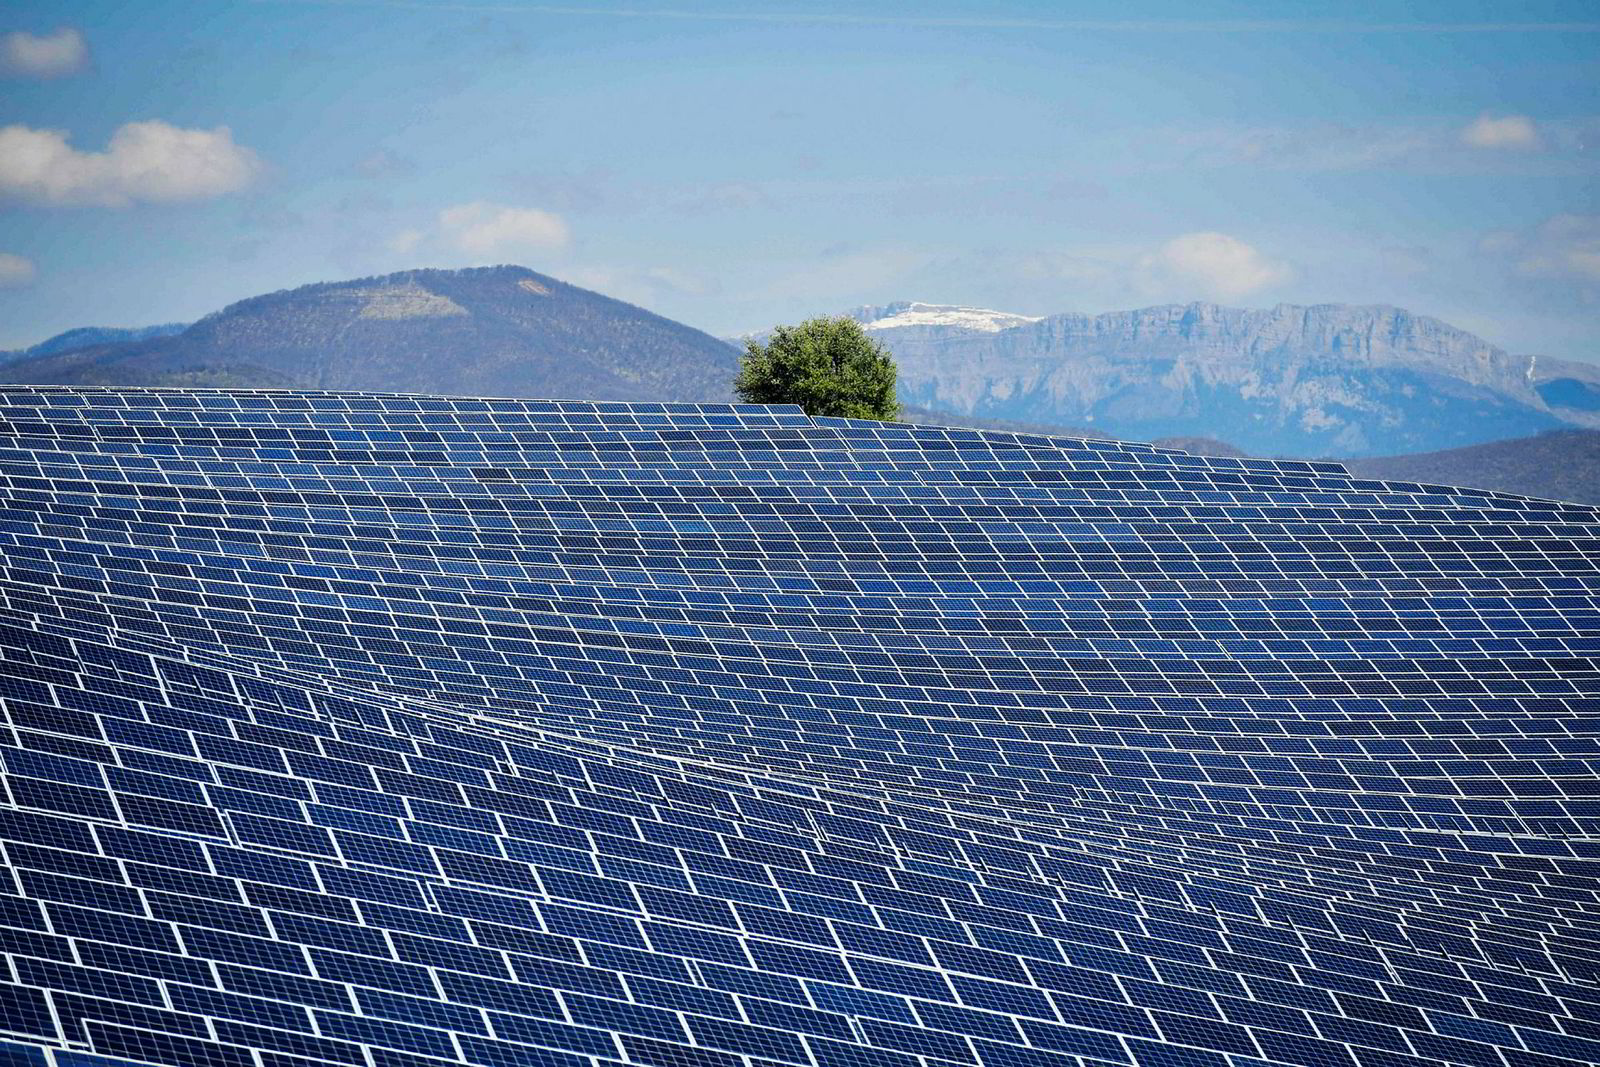 By 2050, the sun and wind will account for nearly half of global electricity production, up from 7% today, is waiting for the Bloomberg New Energy Finance analyst agency, which comes of a new solar park with 112,000 solar panels at La Colle des Mées in Provence.